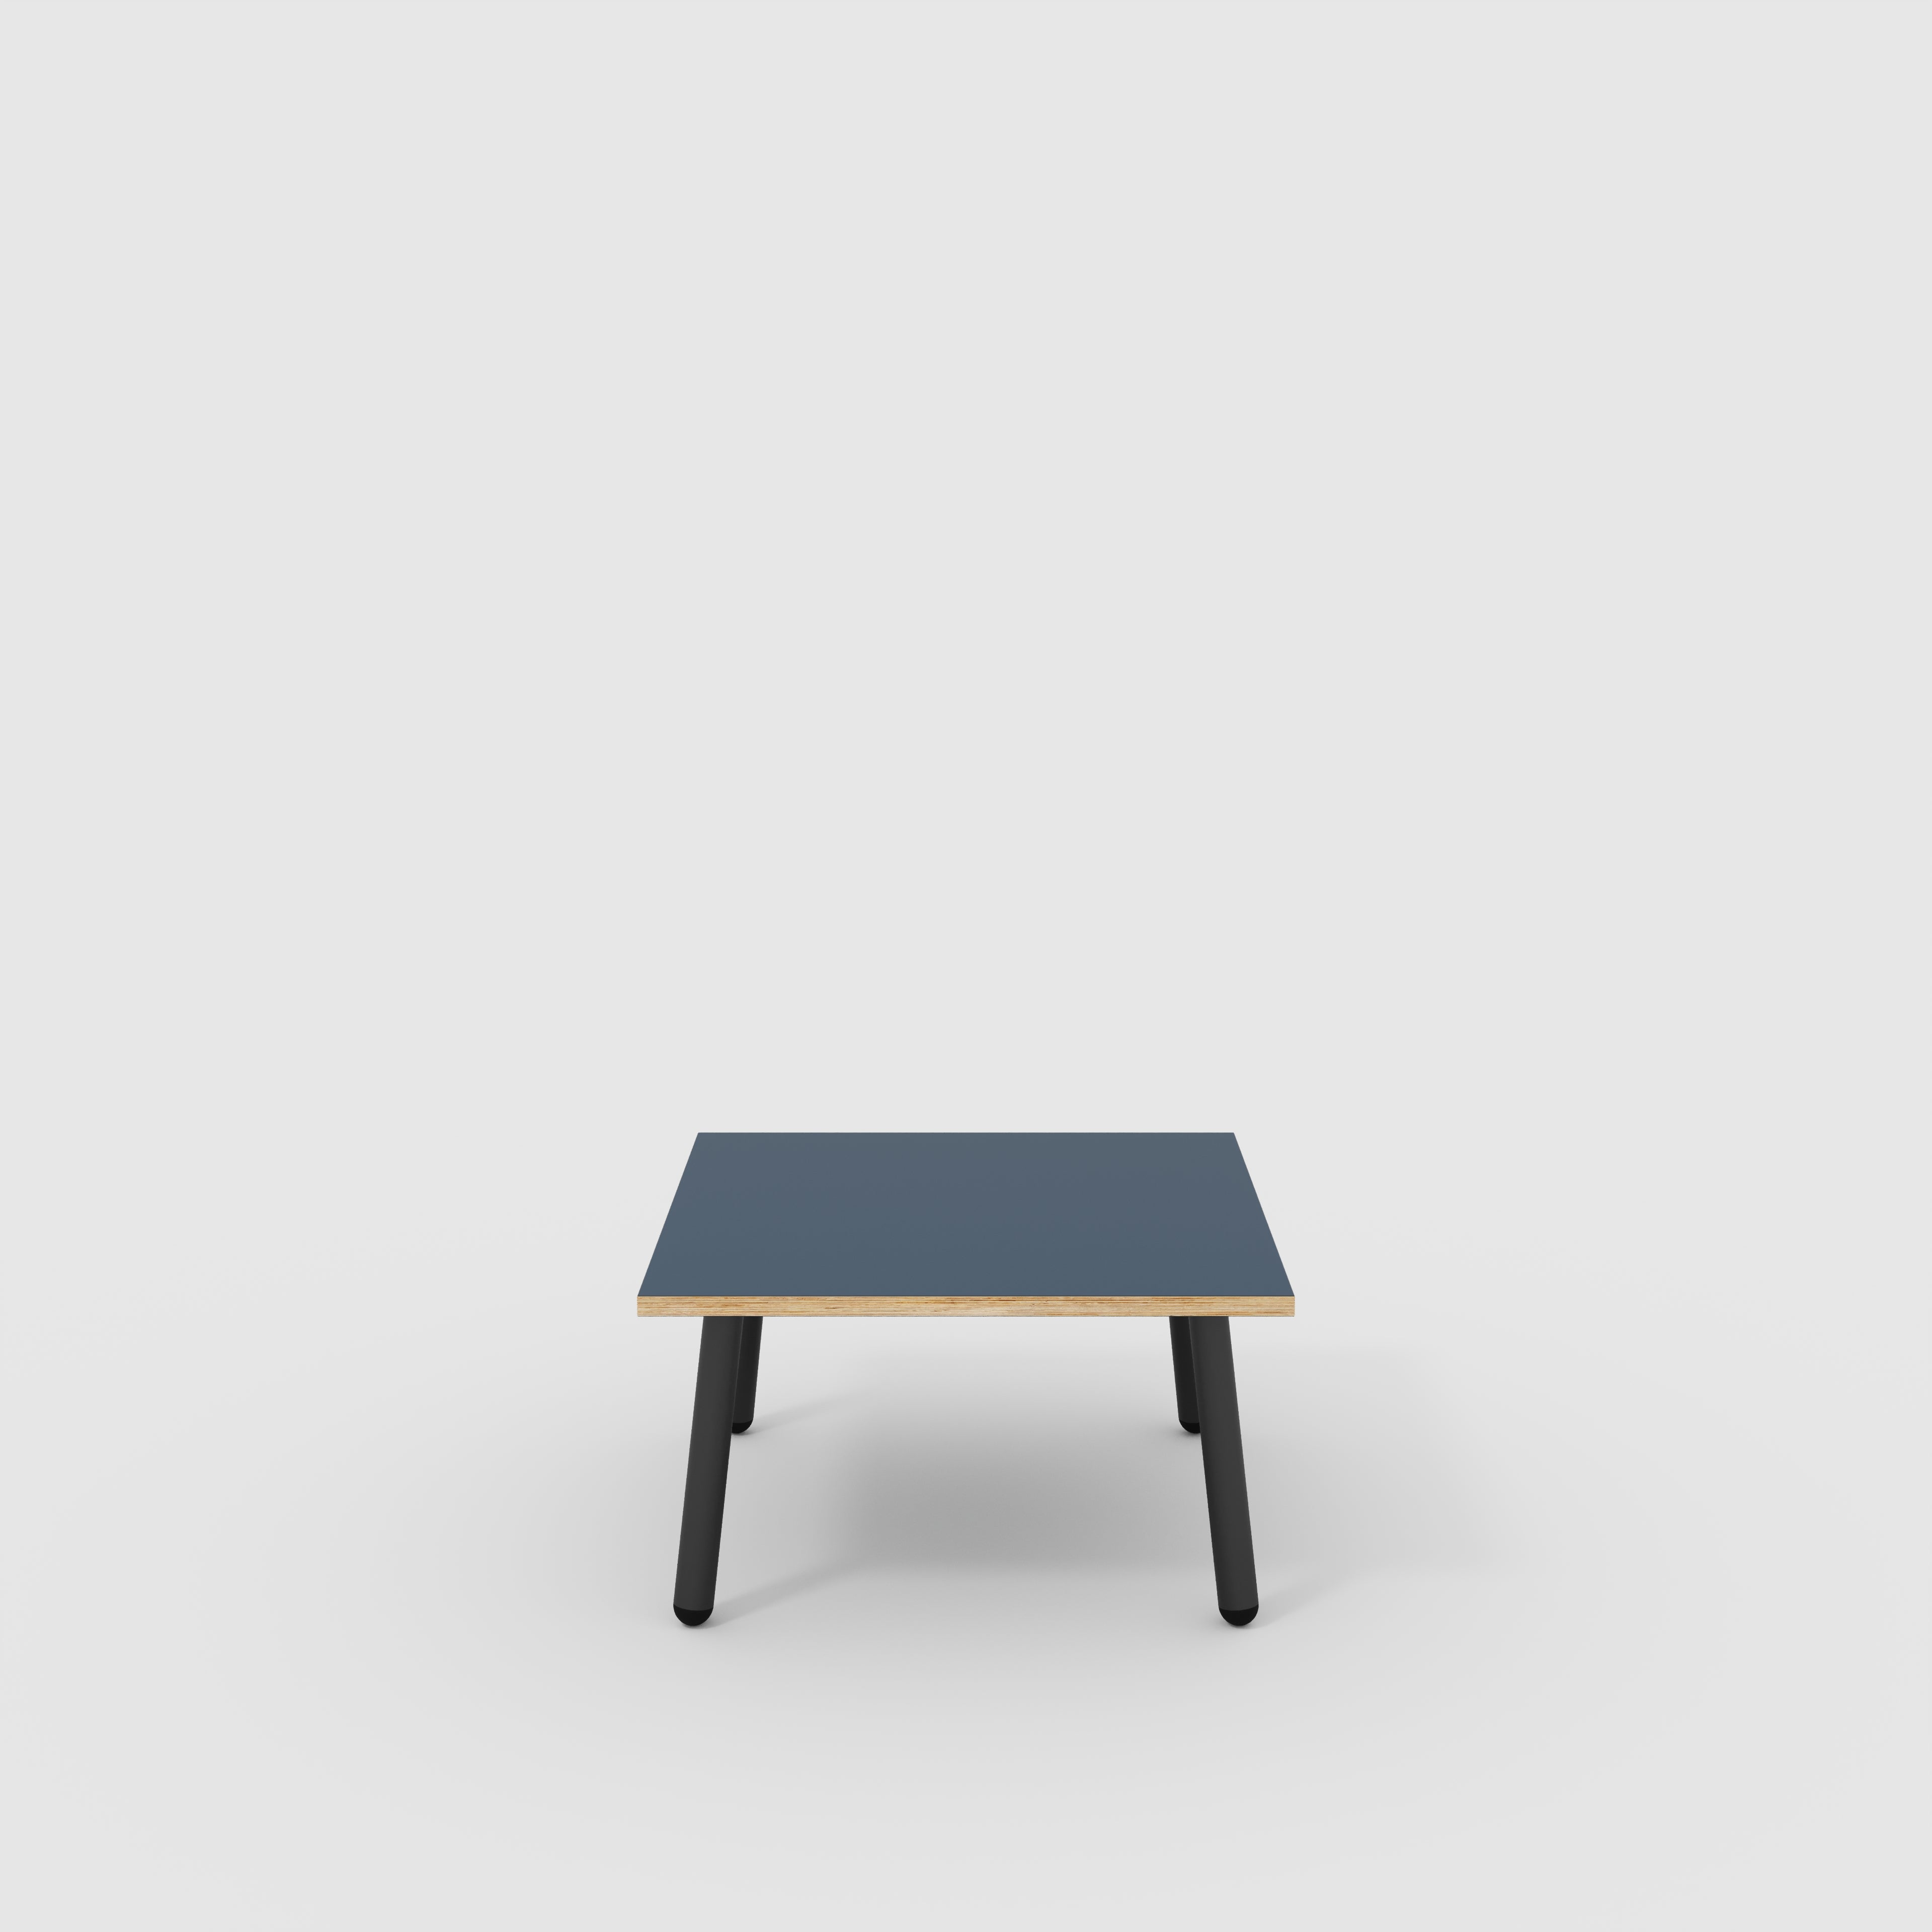 Coffee Table with Black Round Single Pin Legs - Formica Night Sea Blue - 800(w) x 800(d) x 425(h)